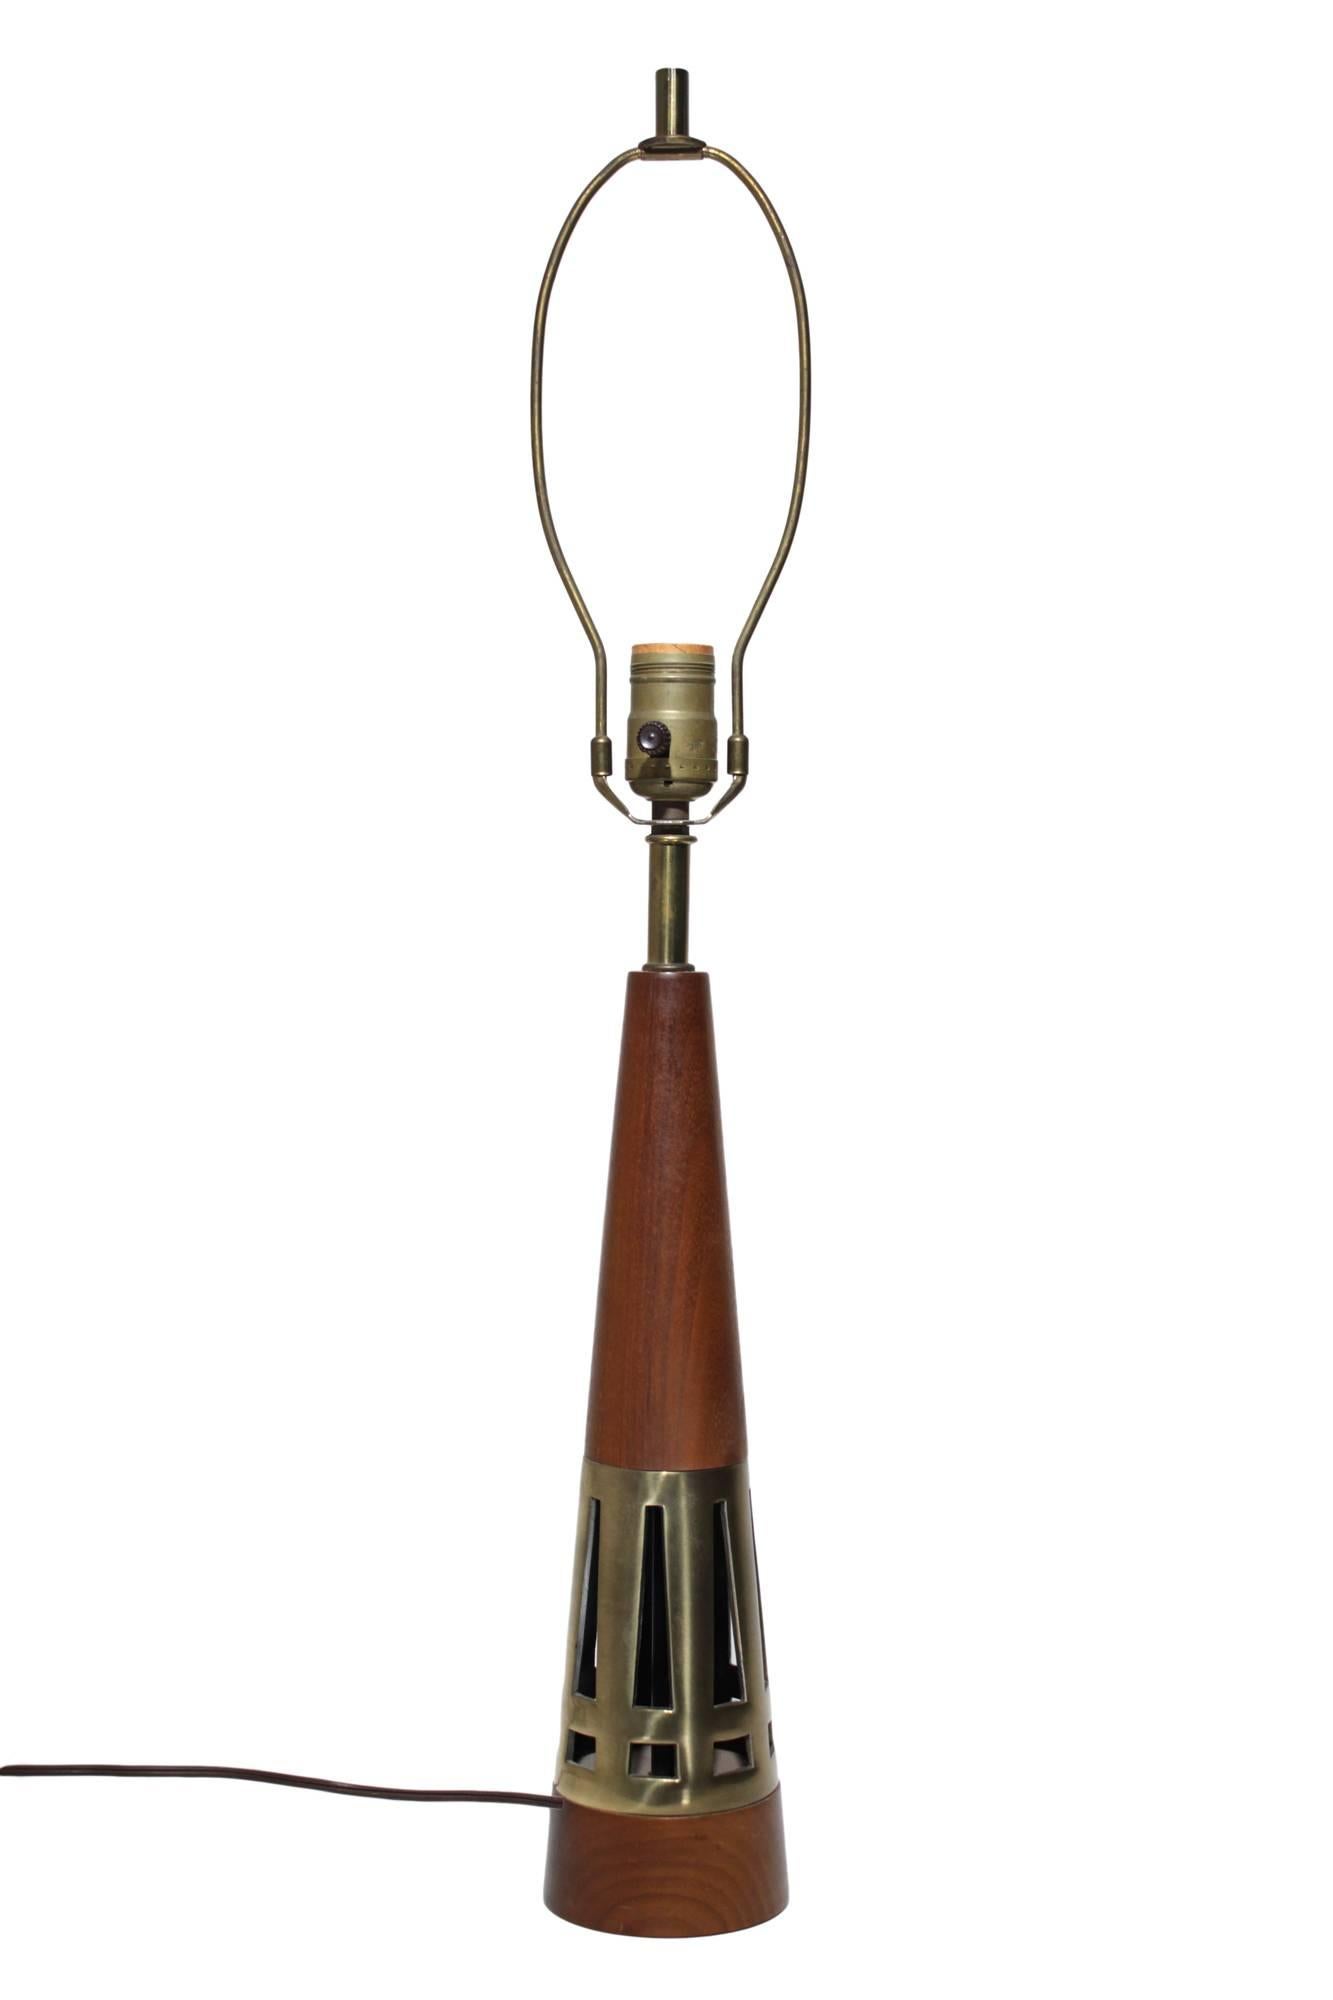 A Mid-Century Modern conical lamp by Tony Paul for Westwood. Finely turned slim walnut cone with an inlaid cast brass section. A few very light scratches to wood and a bit of patina to upper brass parts. In very good working condition, with a